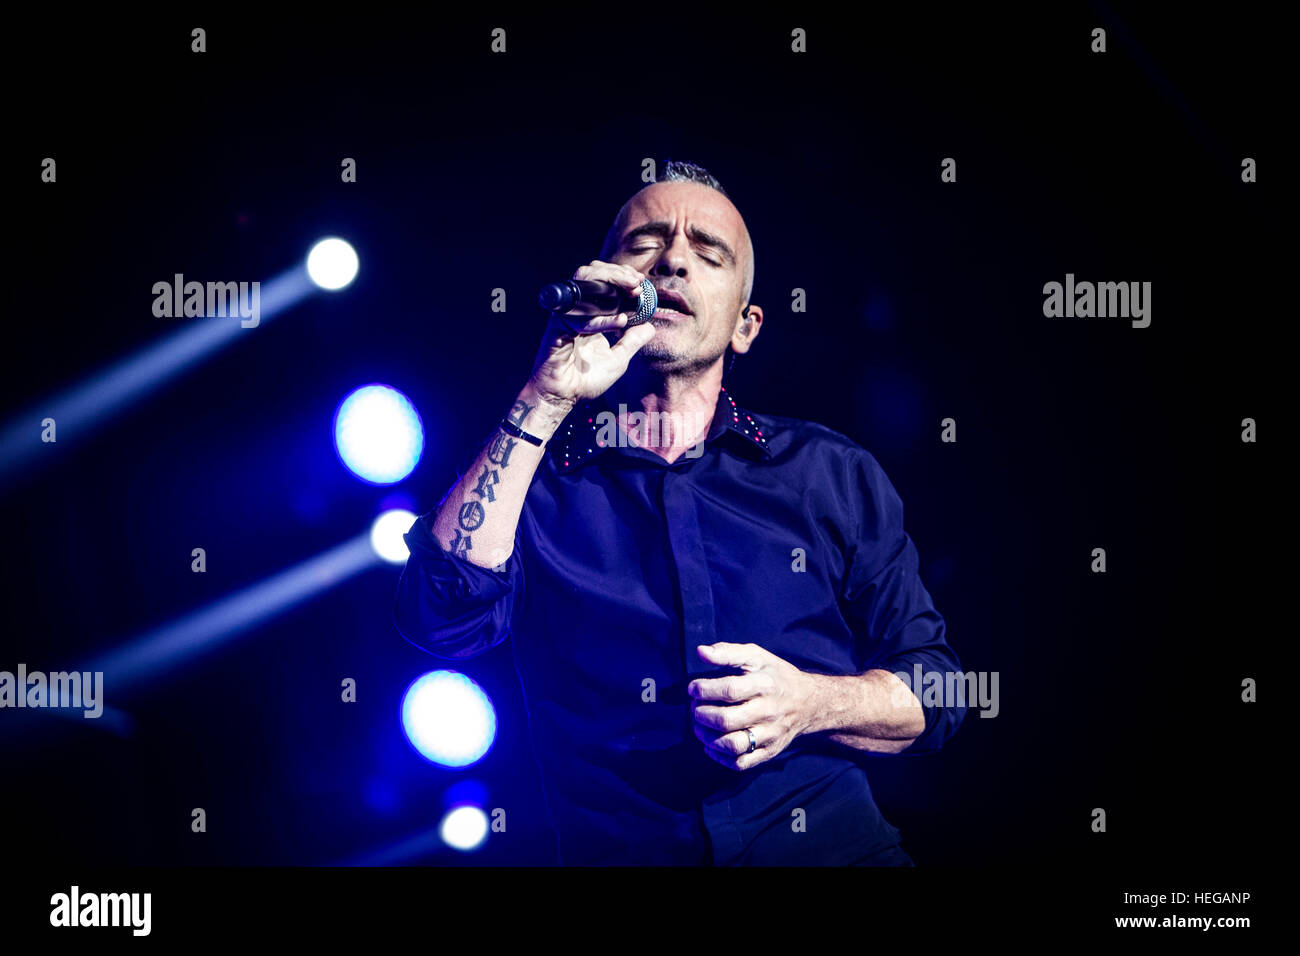 Milan, Italy. 20th Dec, 2016. The Italian pop singer and song-writer Eros  Ramazzotti pictured on stage as he performs at Mediolanum Forum in Assago  Milan Italy. © Roberto Finizio/Pacific Press/Alamy Live News